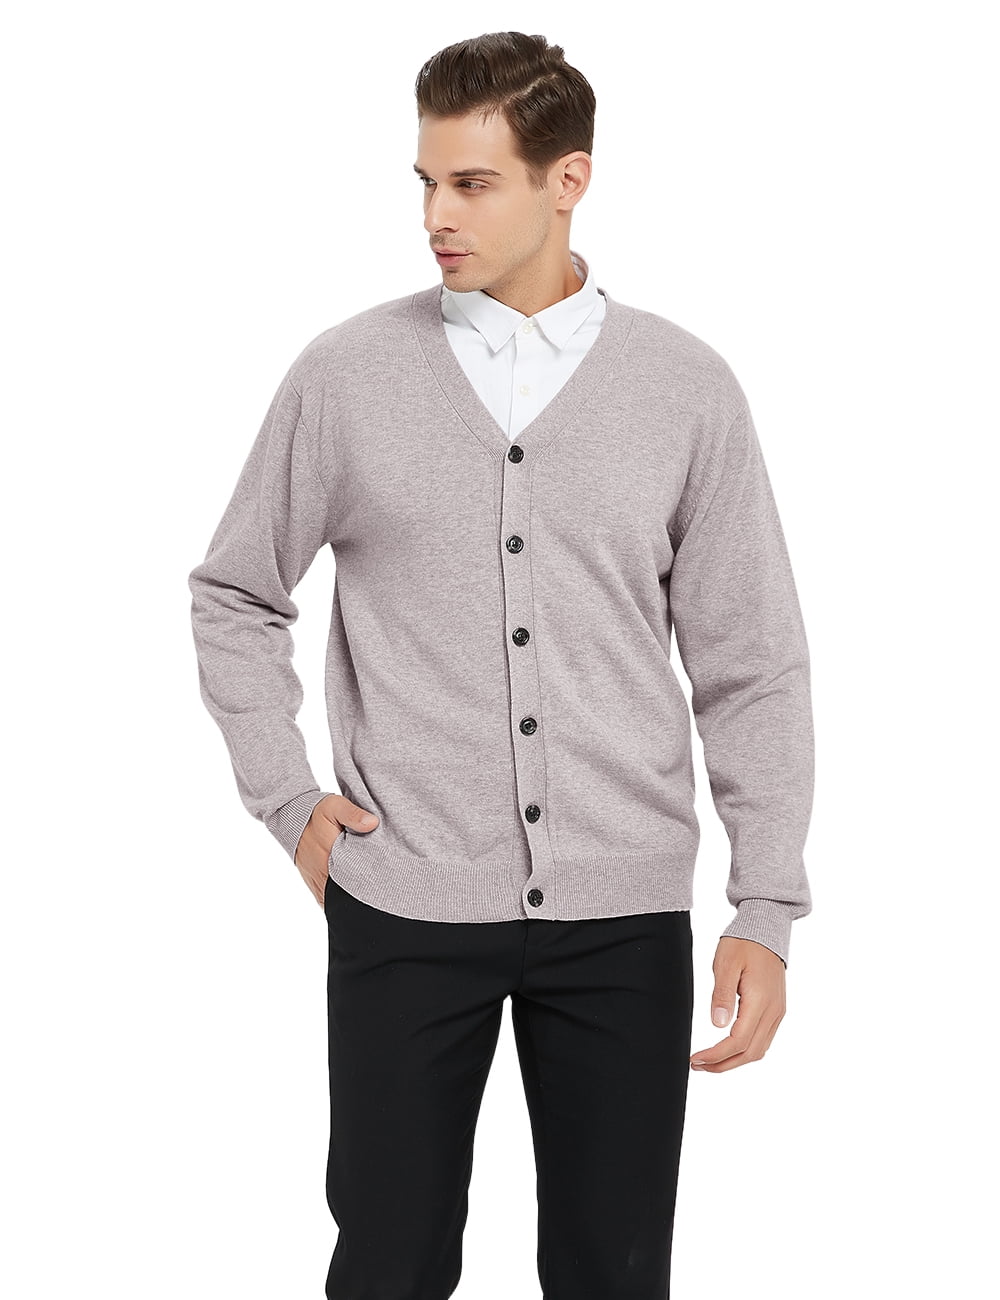 TOPTIE Mens Sweater V Neck Button Cardigan Long Sleeve Basic Knit Work Casual